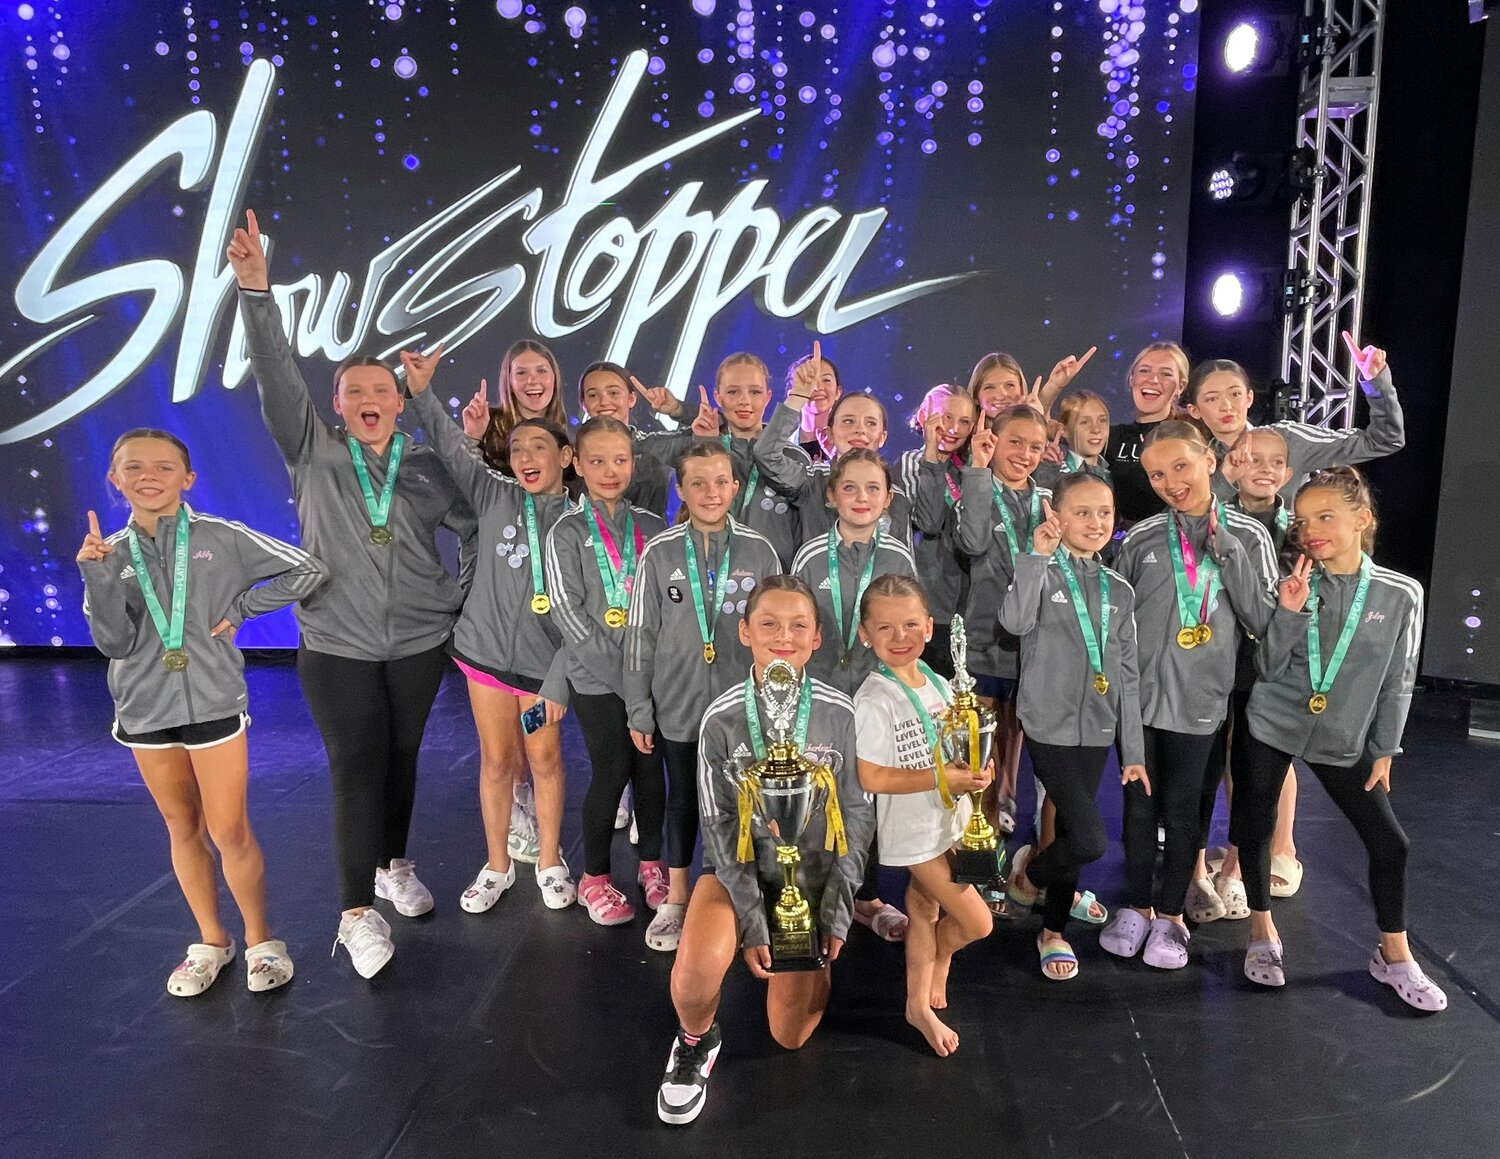 First Place Overall Junior Super Group in the Showstoppers competition in Orlando are pictured: Abby, Vivian, Madison Hughes, Sydney, Emma, Lara, Sadie, Lola, Marian, Reese, Jazzy, Reilly Hughes, Sophie, Tori, Abigail, Autumn, Scarlett, Avery, Veronica, Chantilly, Julep, Charleigh and Maclyn.